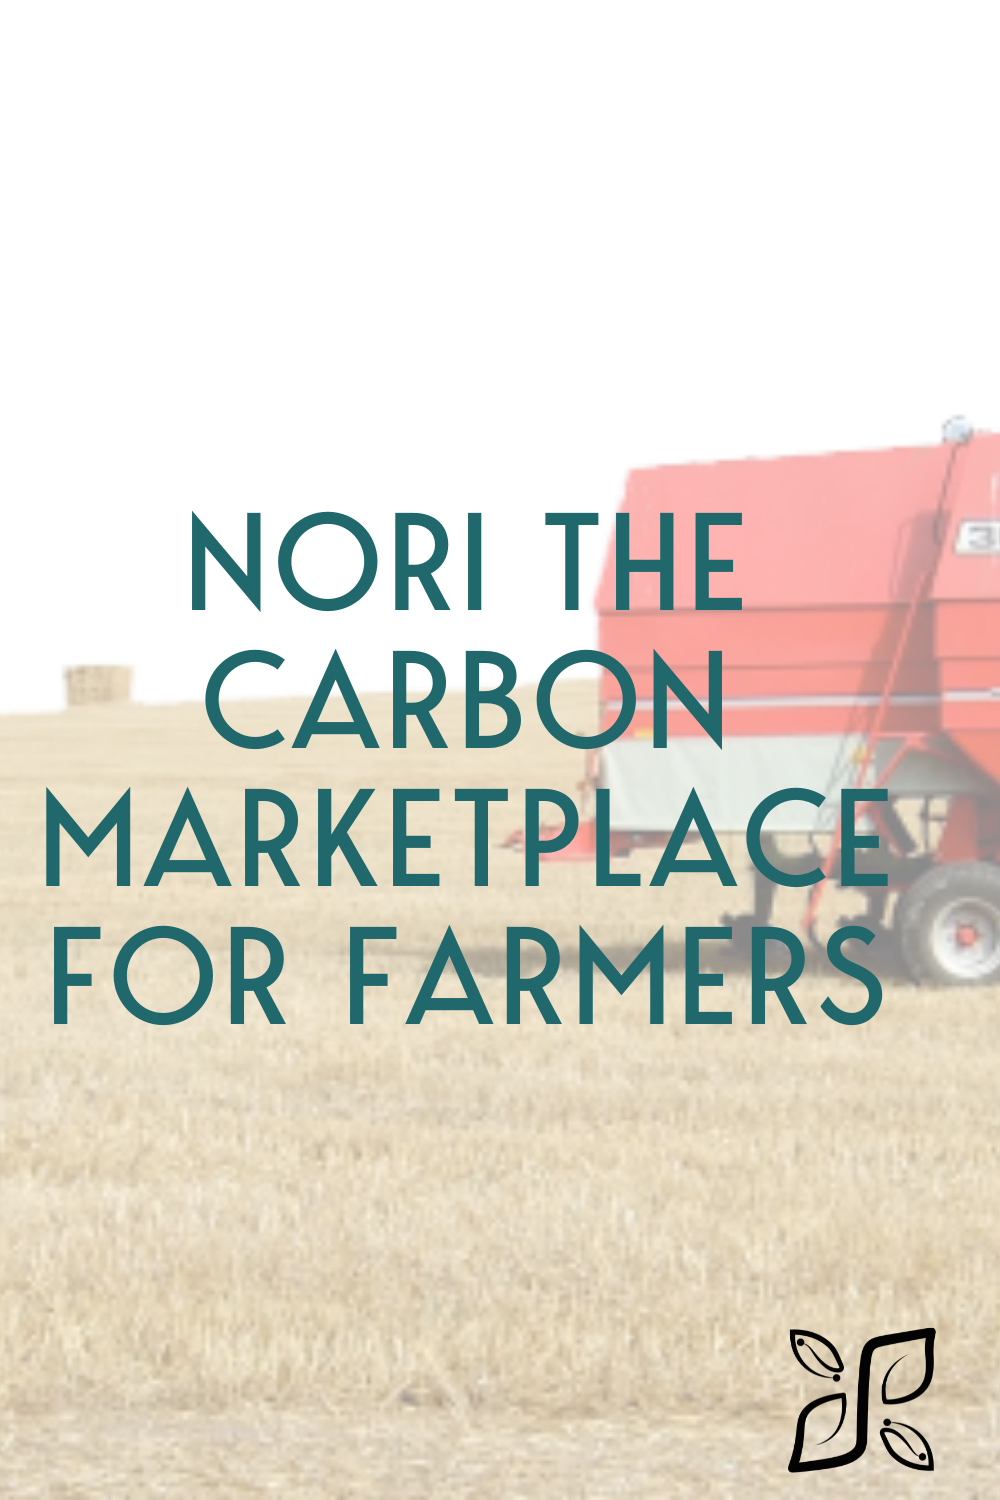 Nori the carbon marketplace for farmers